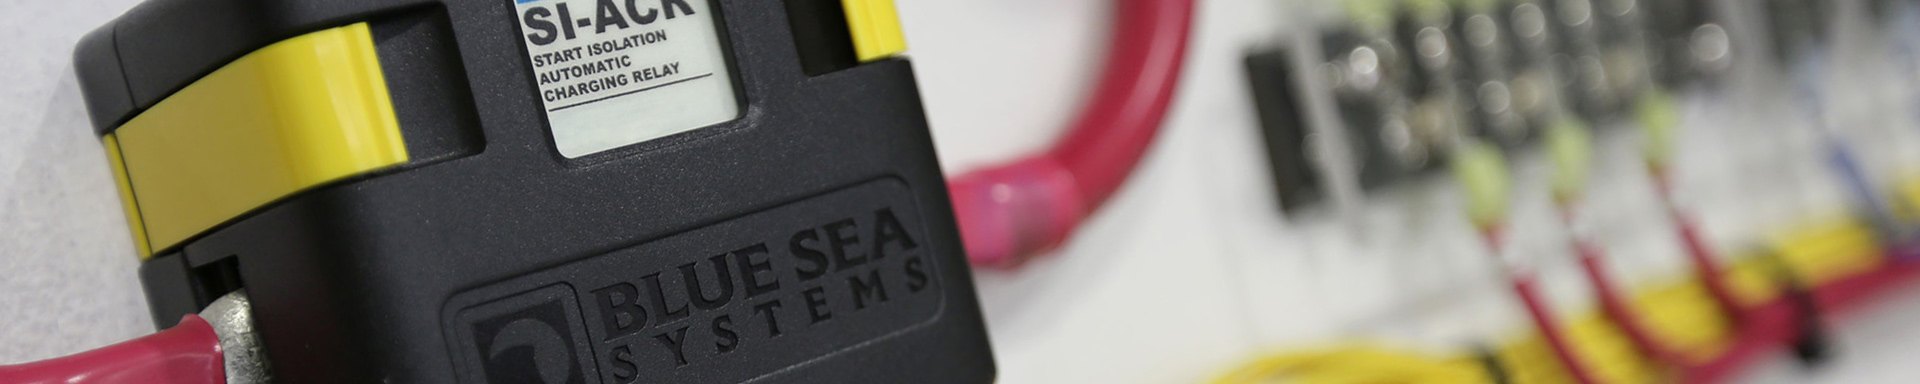 Blue Sea Systems Batteries & Power